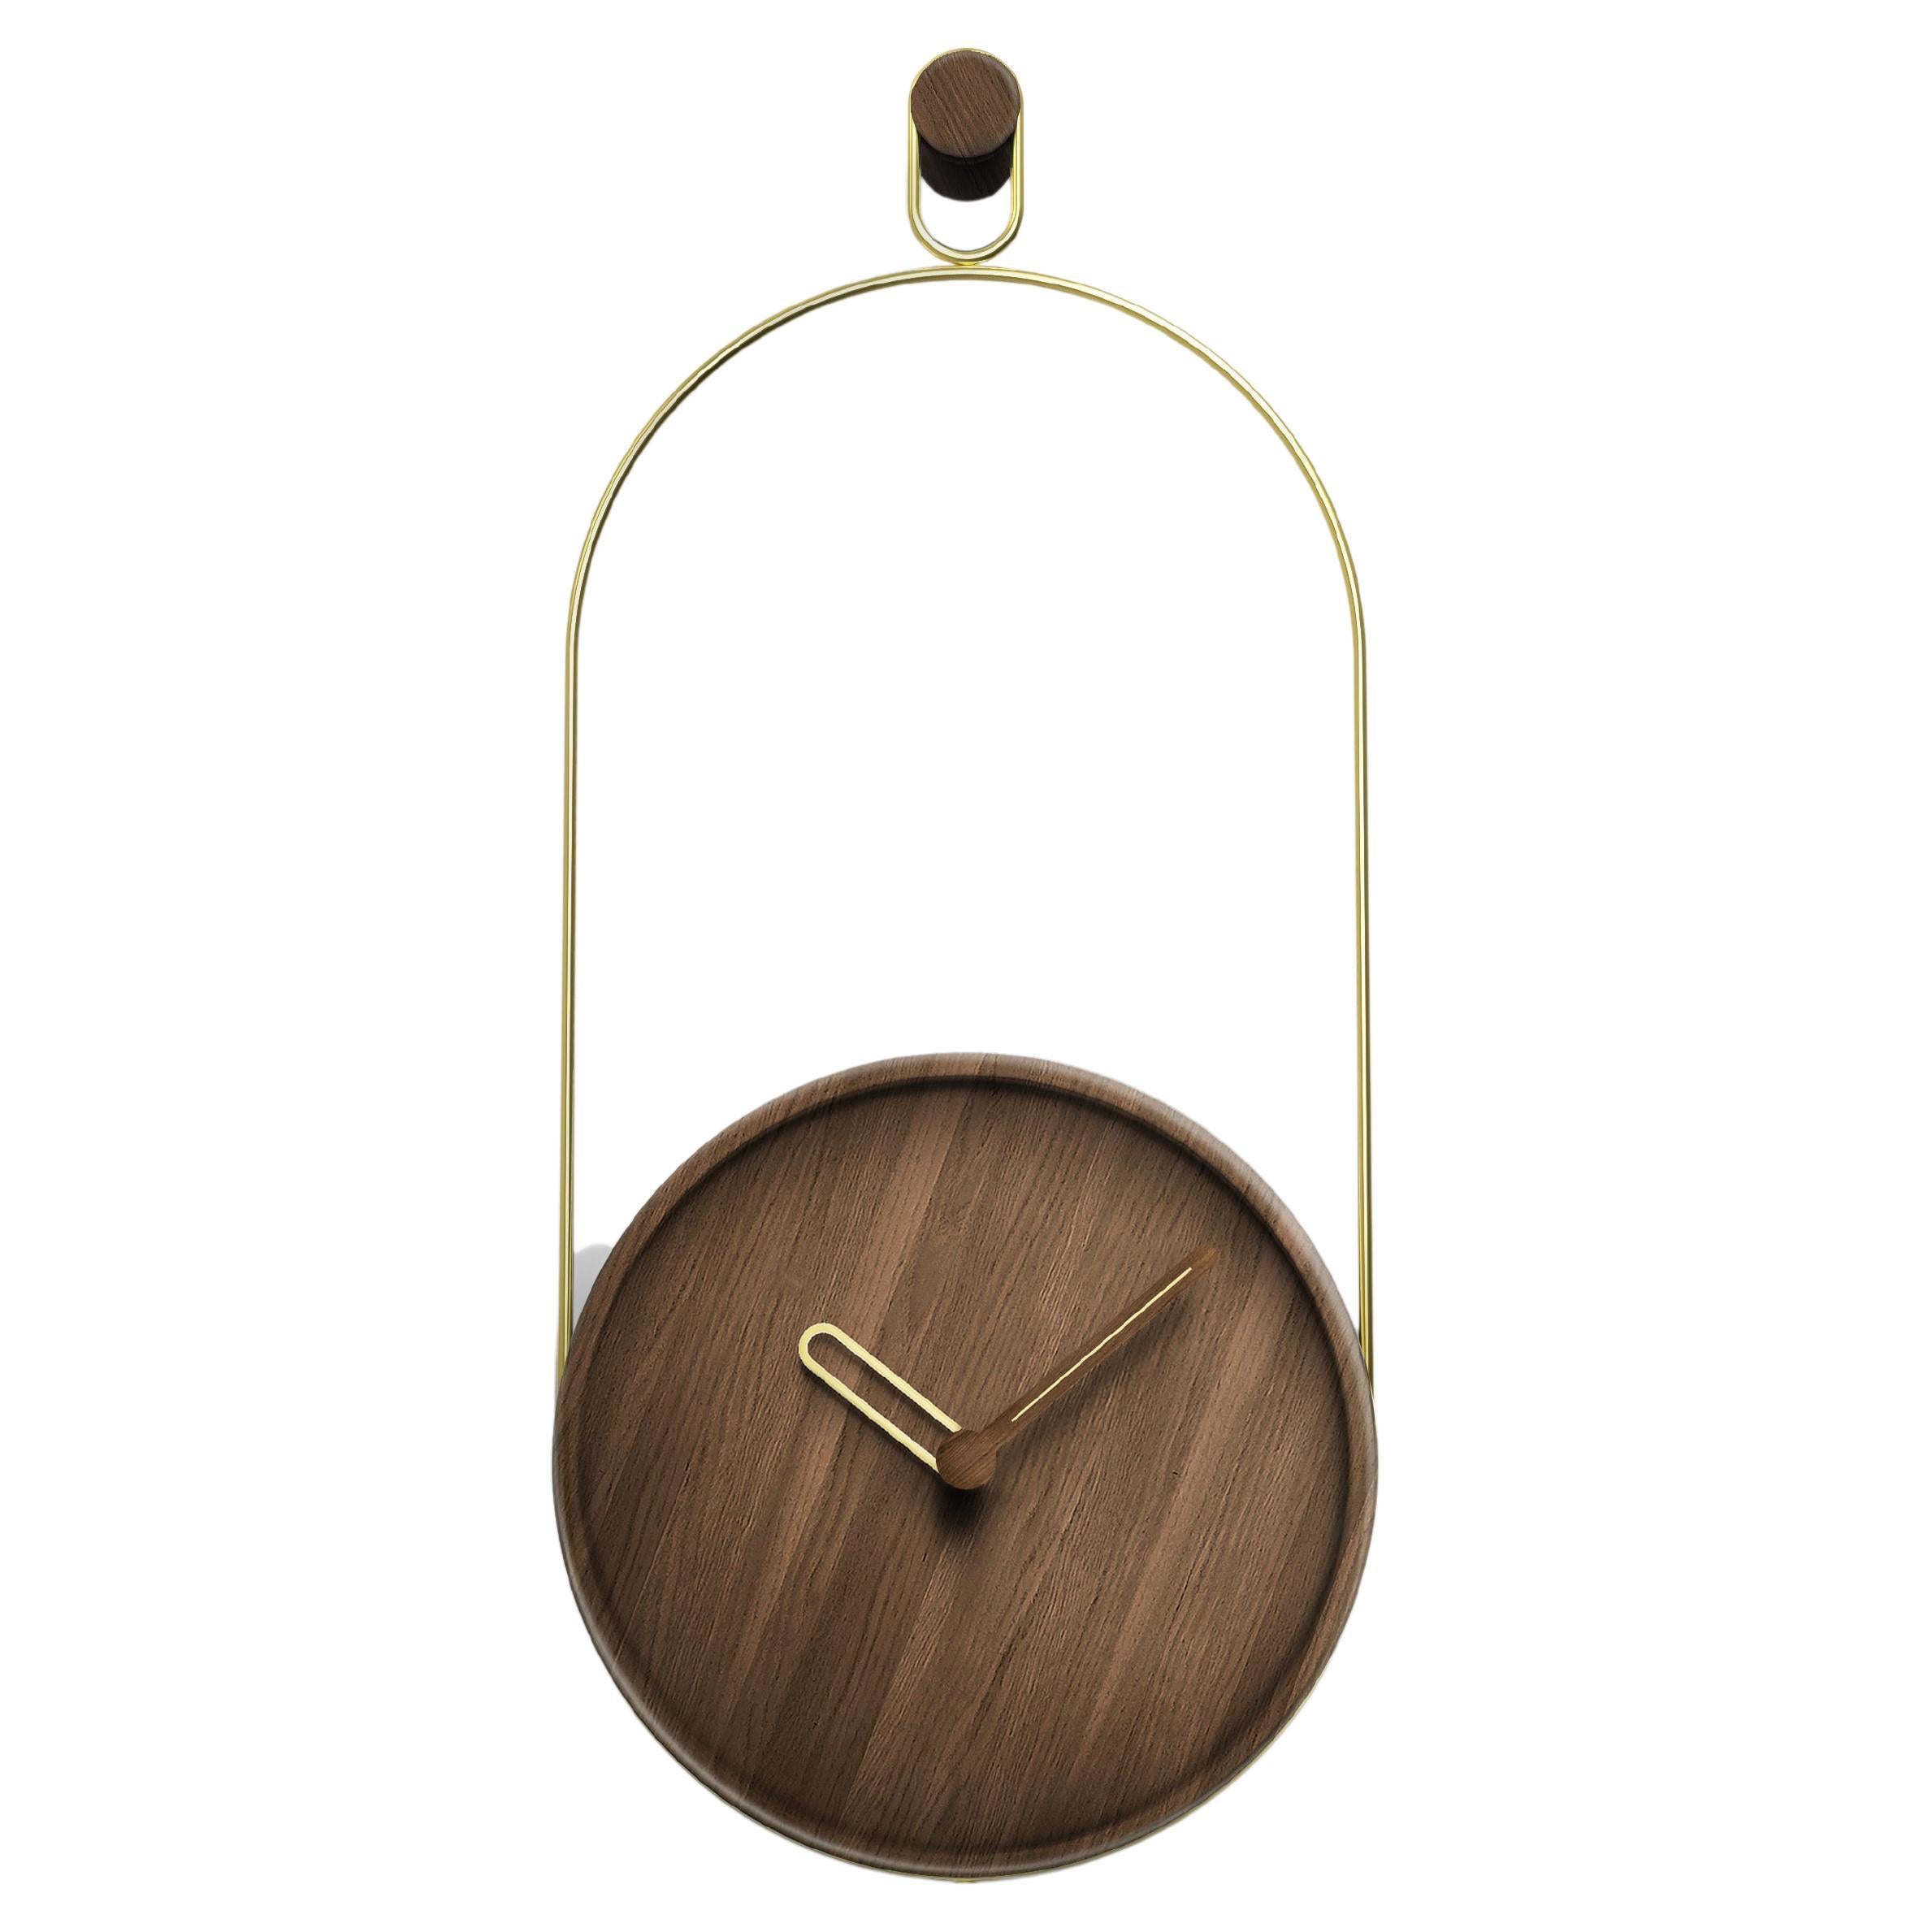 Nomon Micro Eslabon Wall Clock  By Andres Martinez For Sale